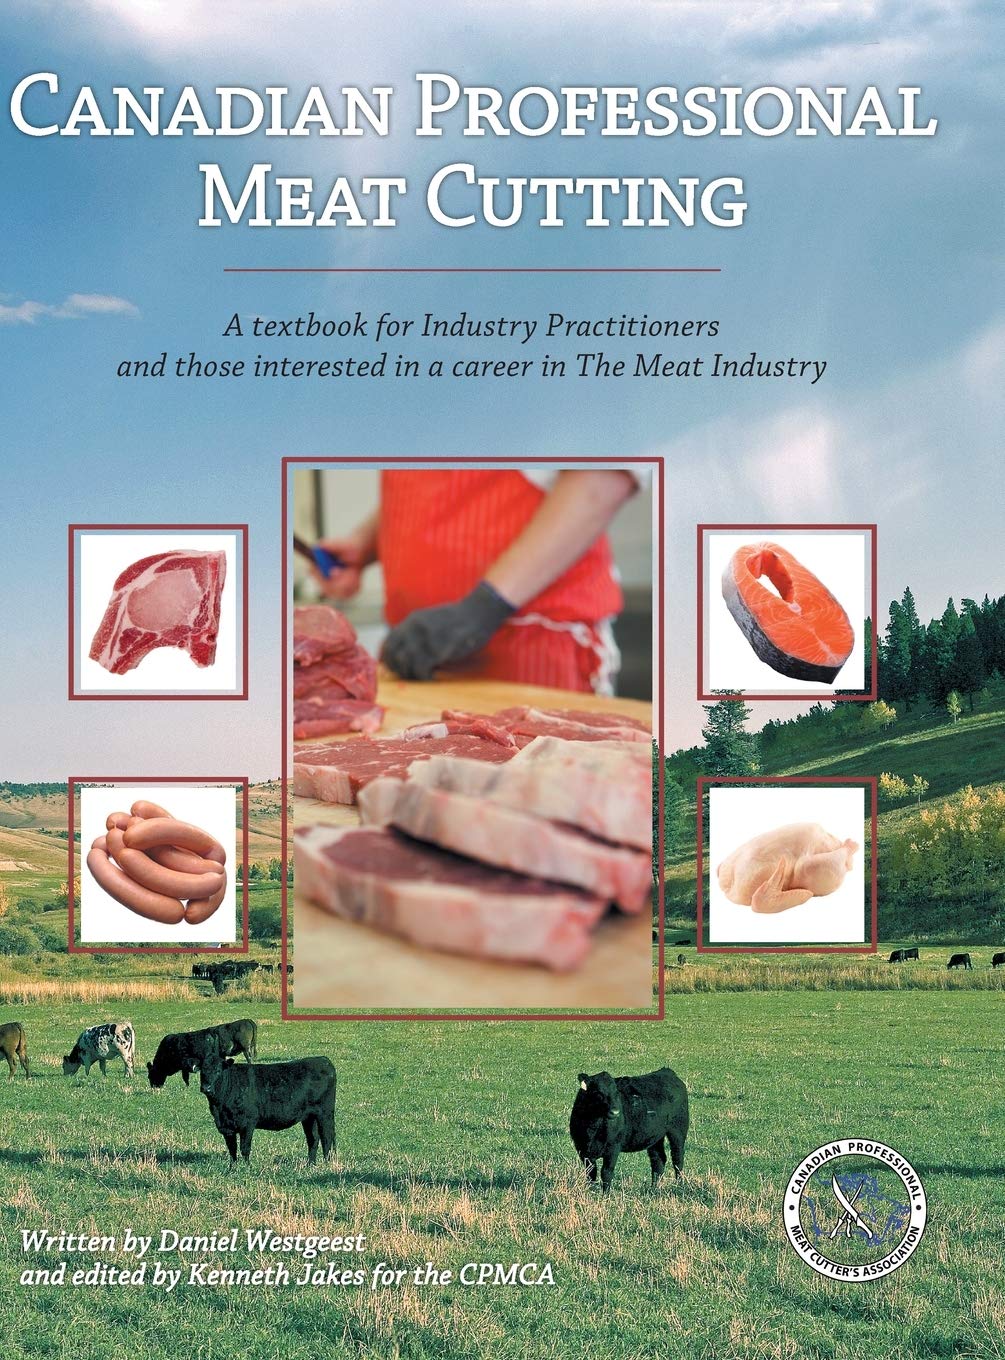 Canadian Professional Meat Cutting